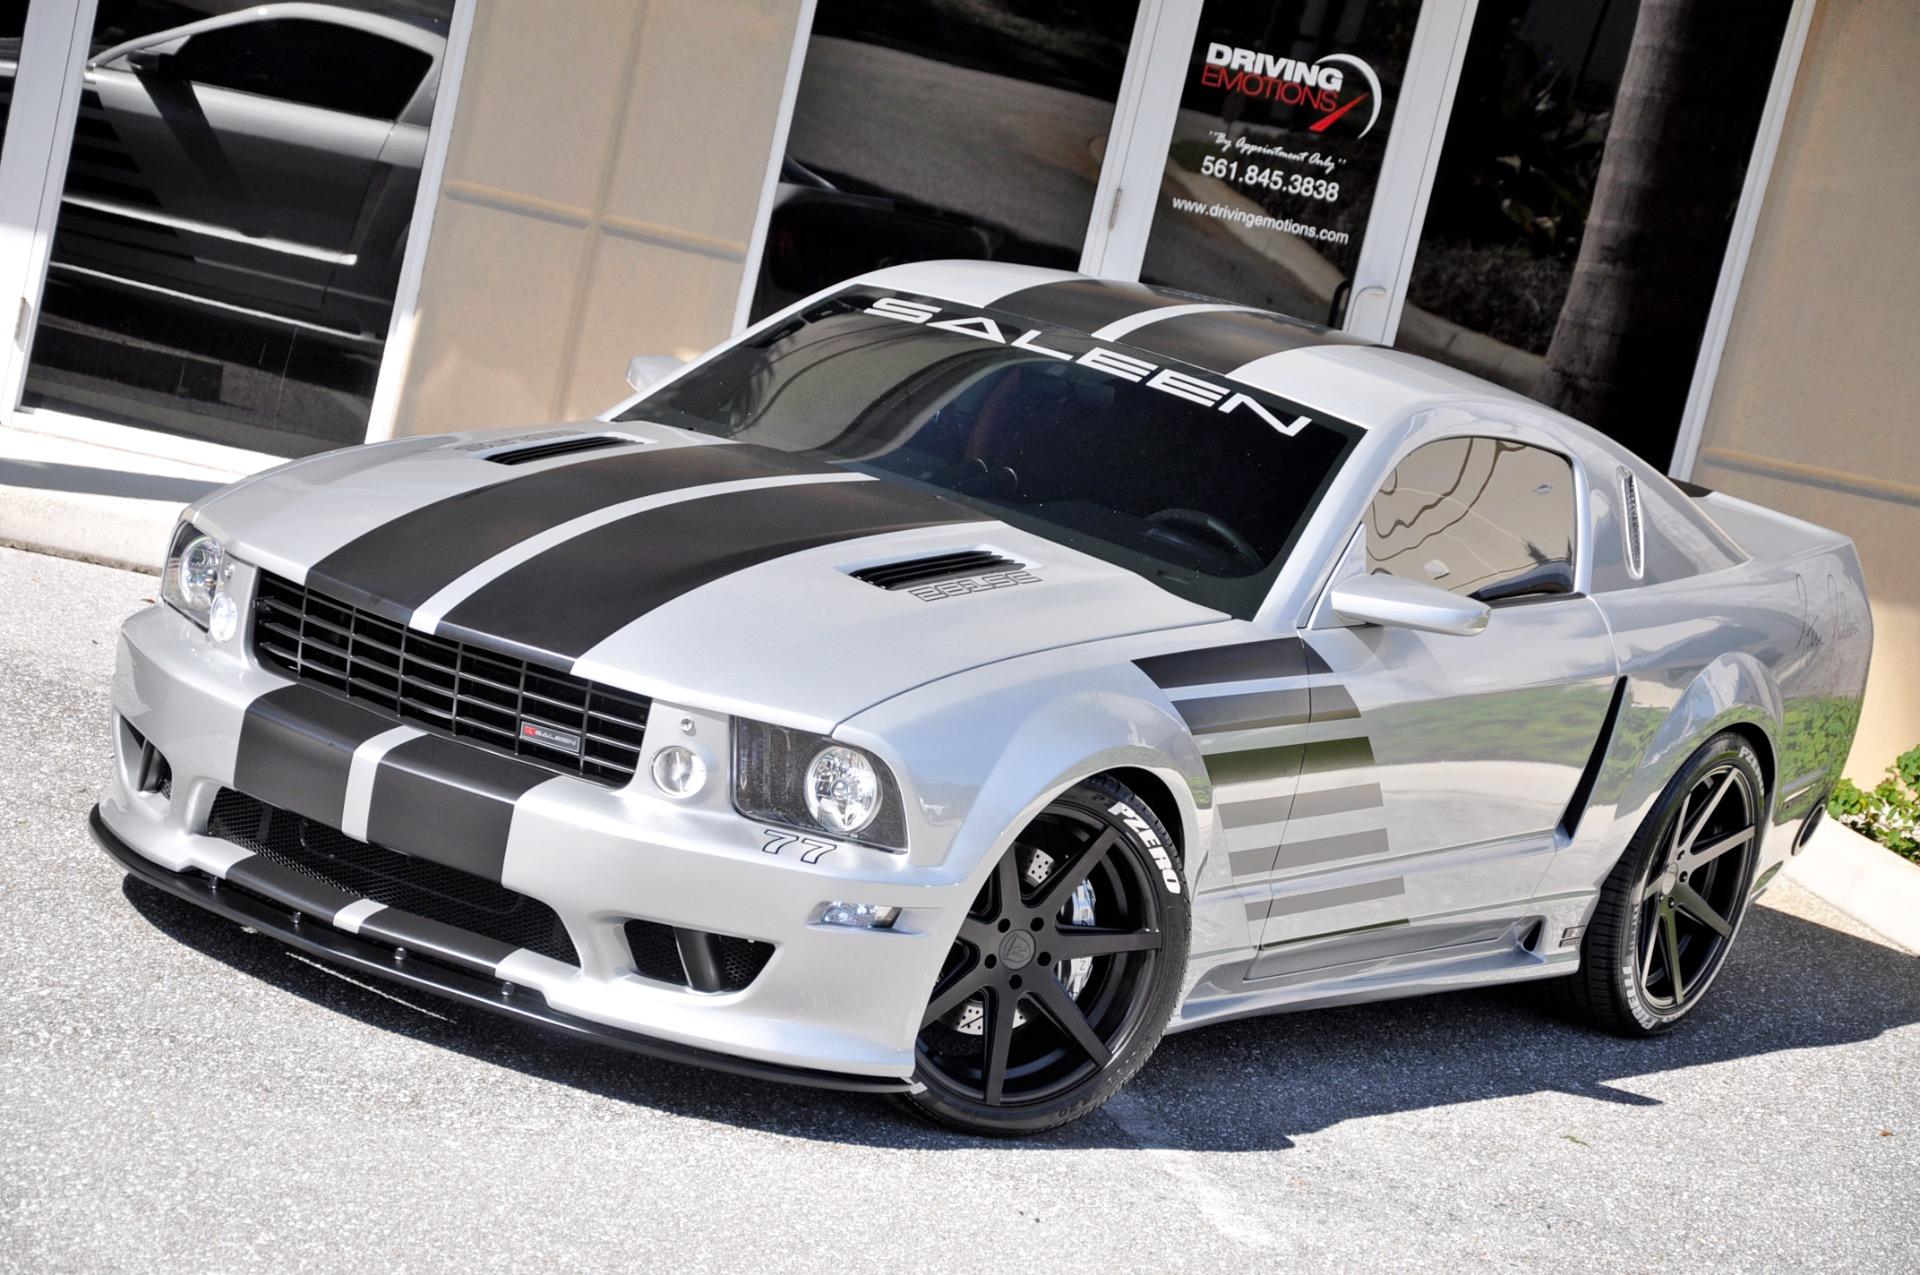 Used 2005 Ford Mustang Saleen S281 SC Coupe Lake Park, FL.